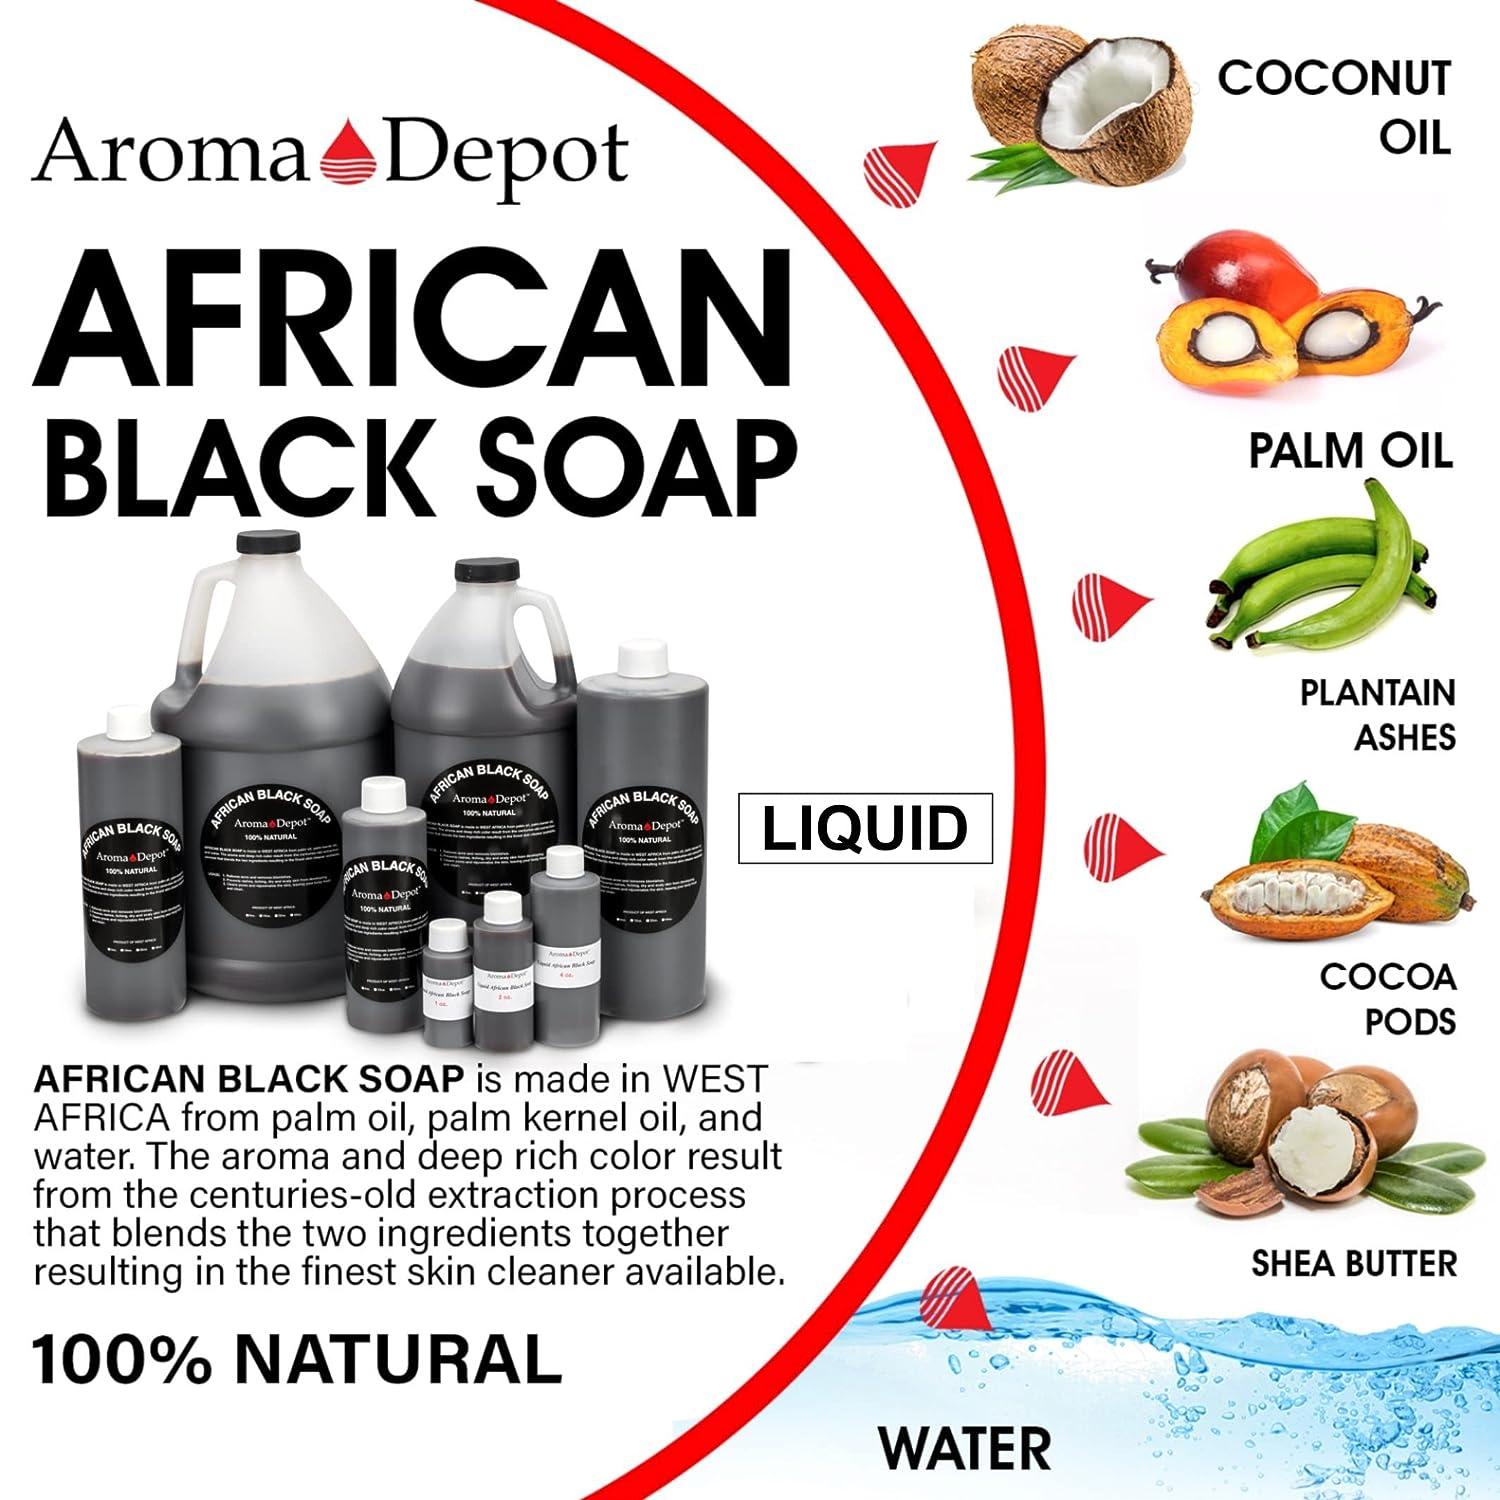 Aroma Depot Raw African Liquid 1/2 Gallon Black Soap 100% Natural soap for  Acne, Eczema, Psoriasis, and Dry Skin Scar Removal Face And Body Wash.